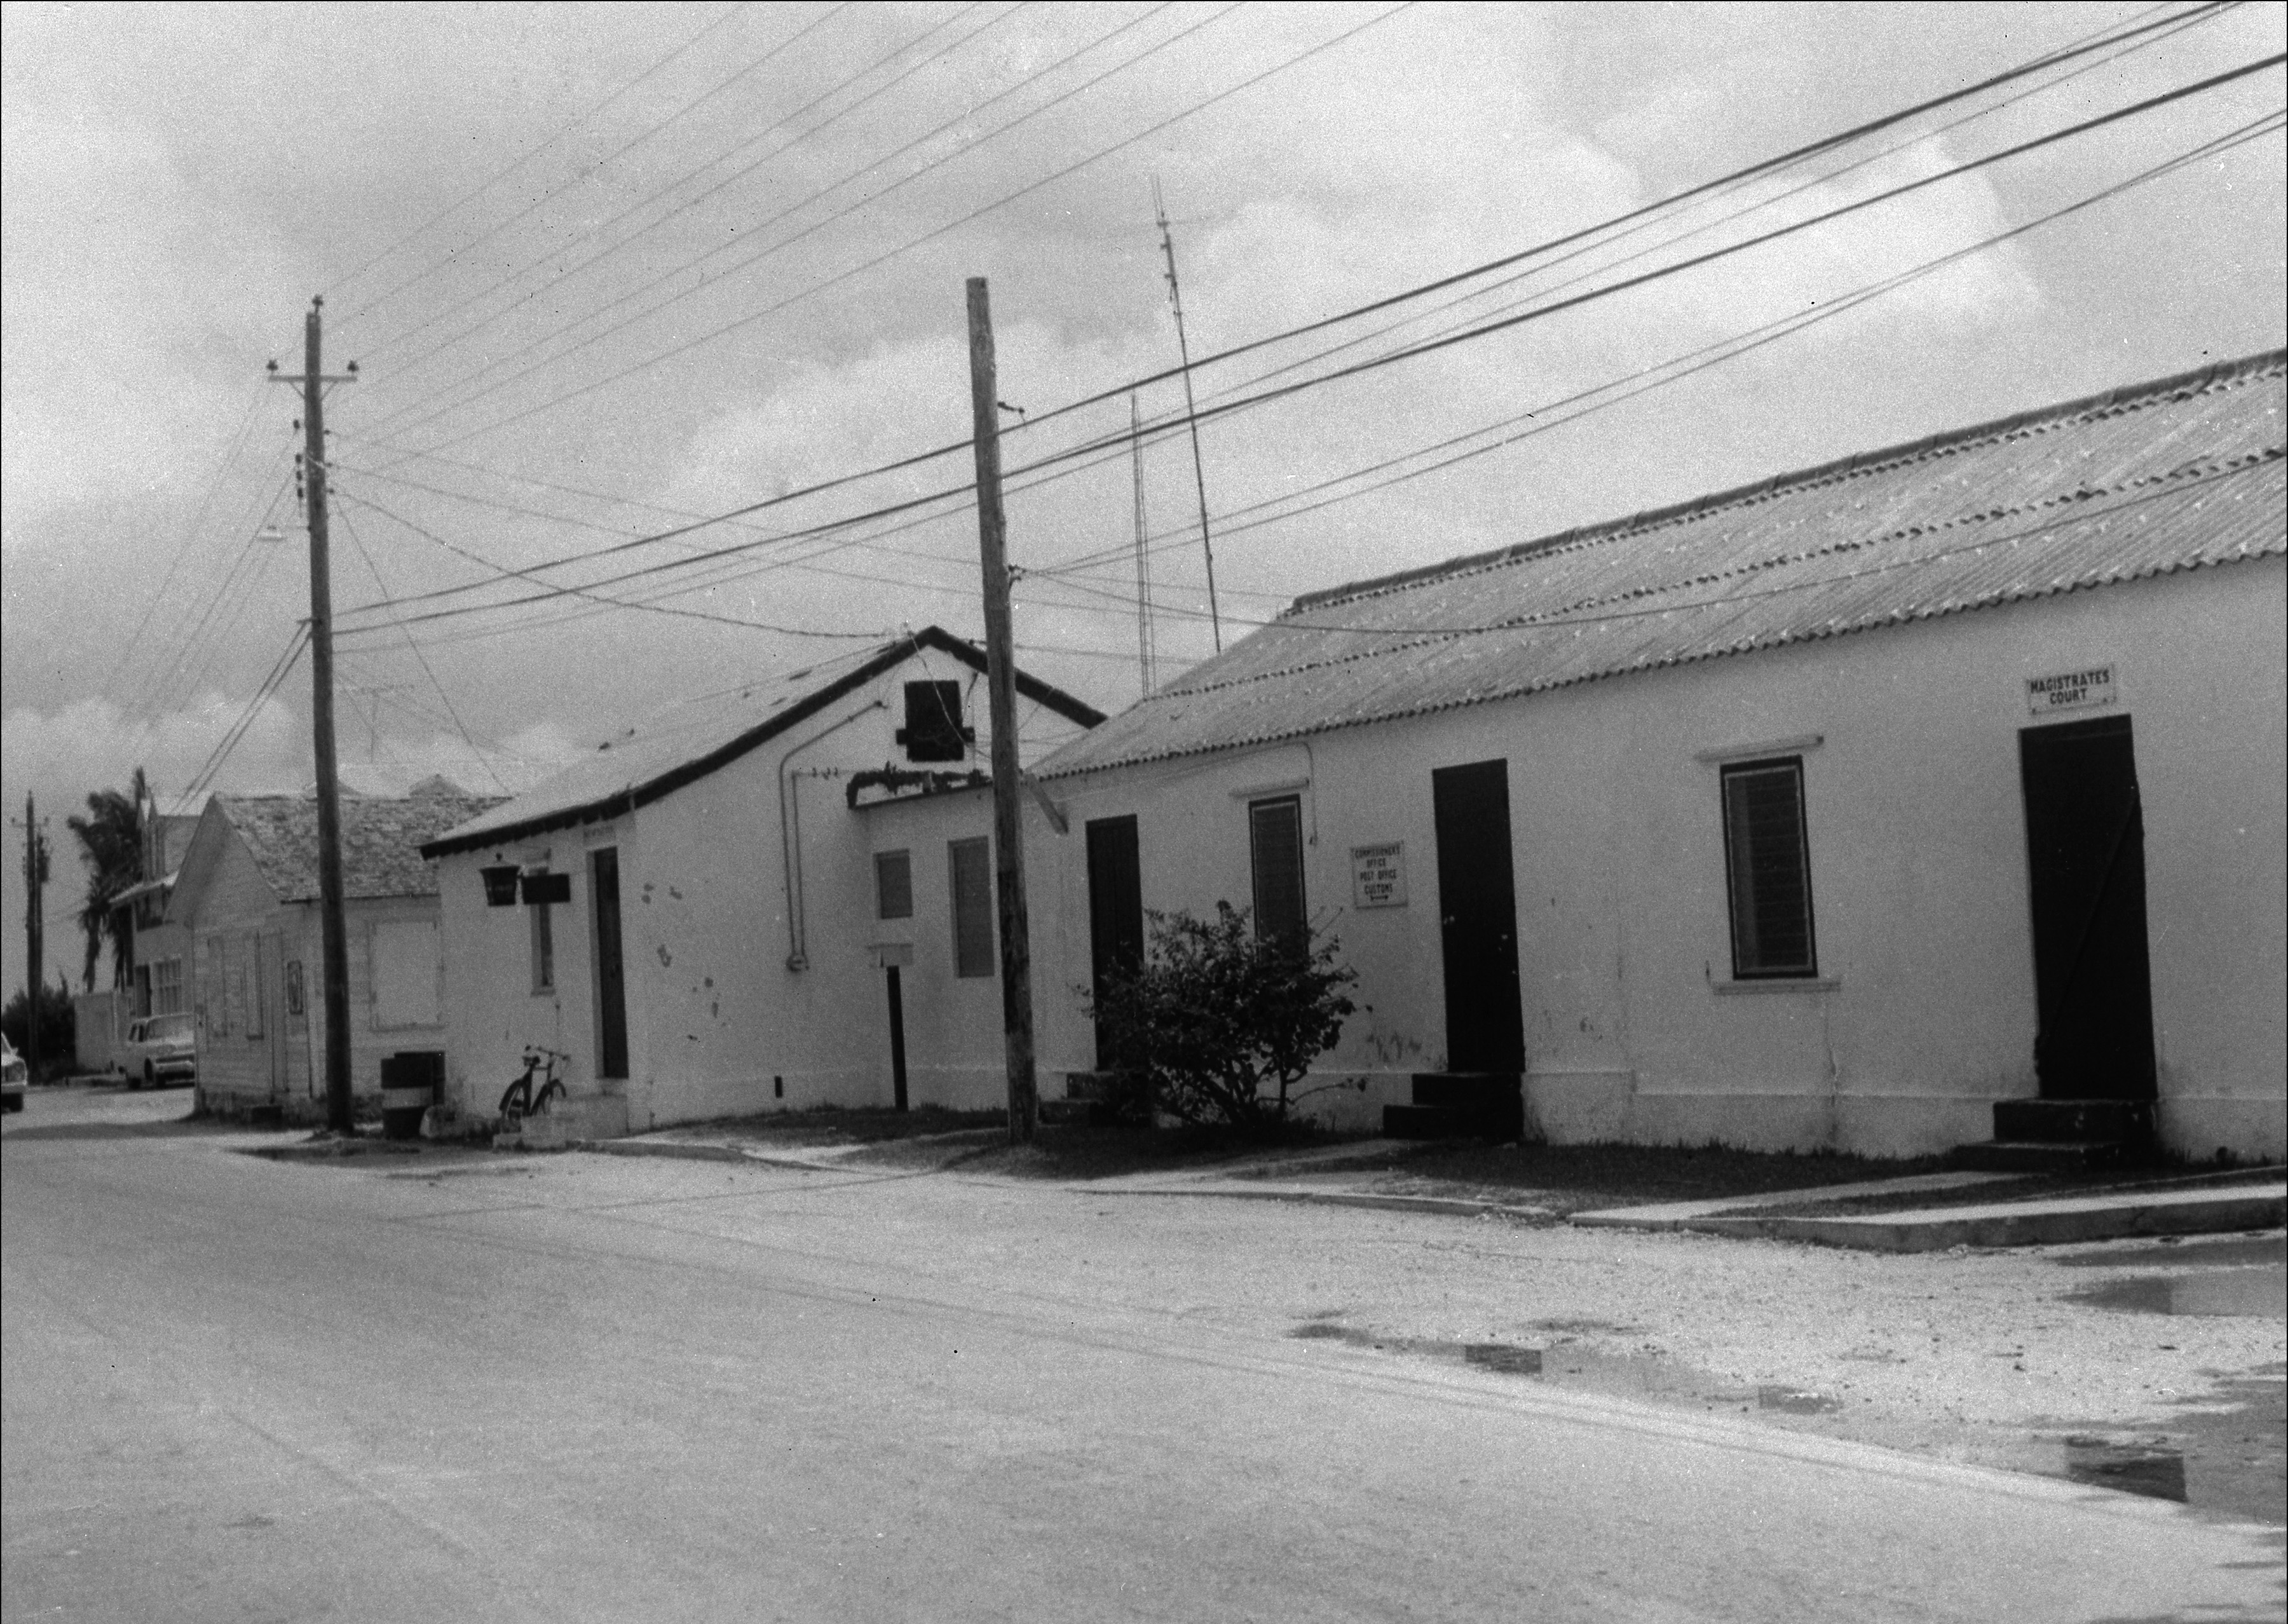 Commissioner's office and police station at West End, 1960's